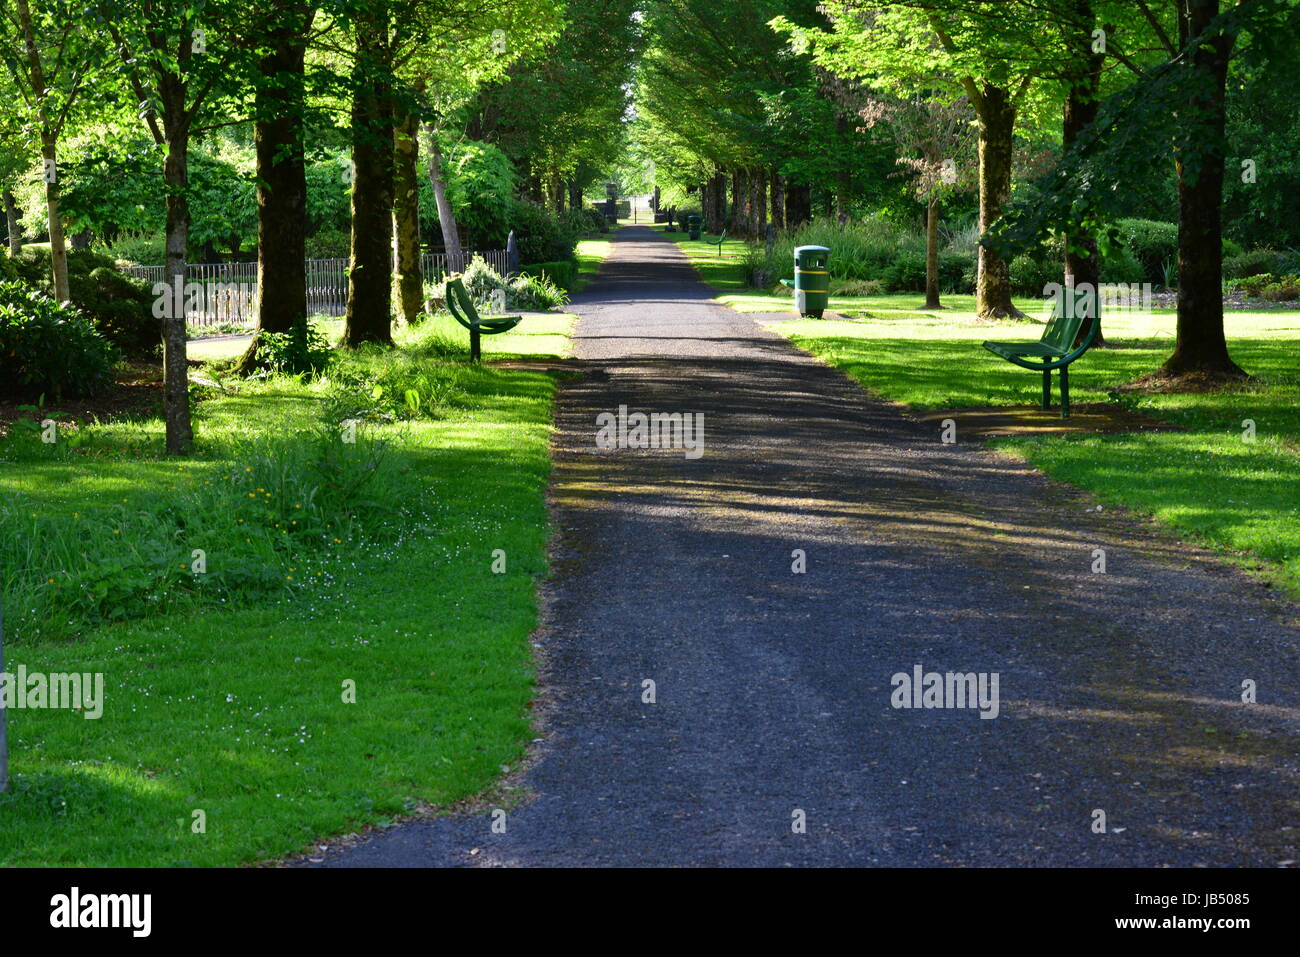 A park at Adare in Ireland Stock Photo